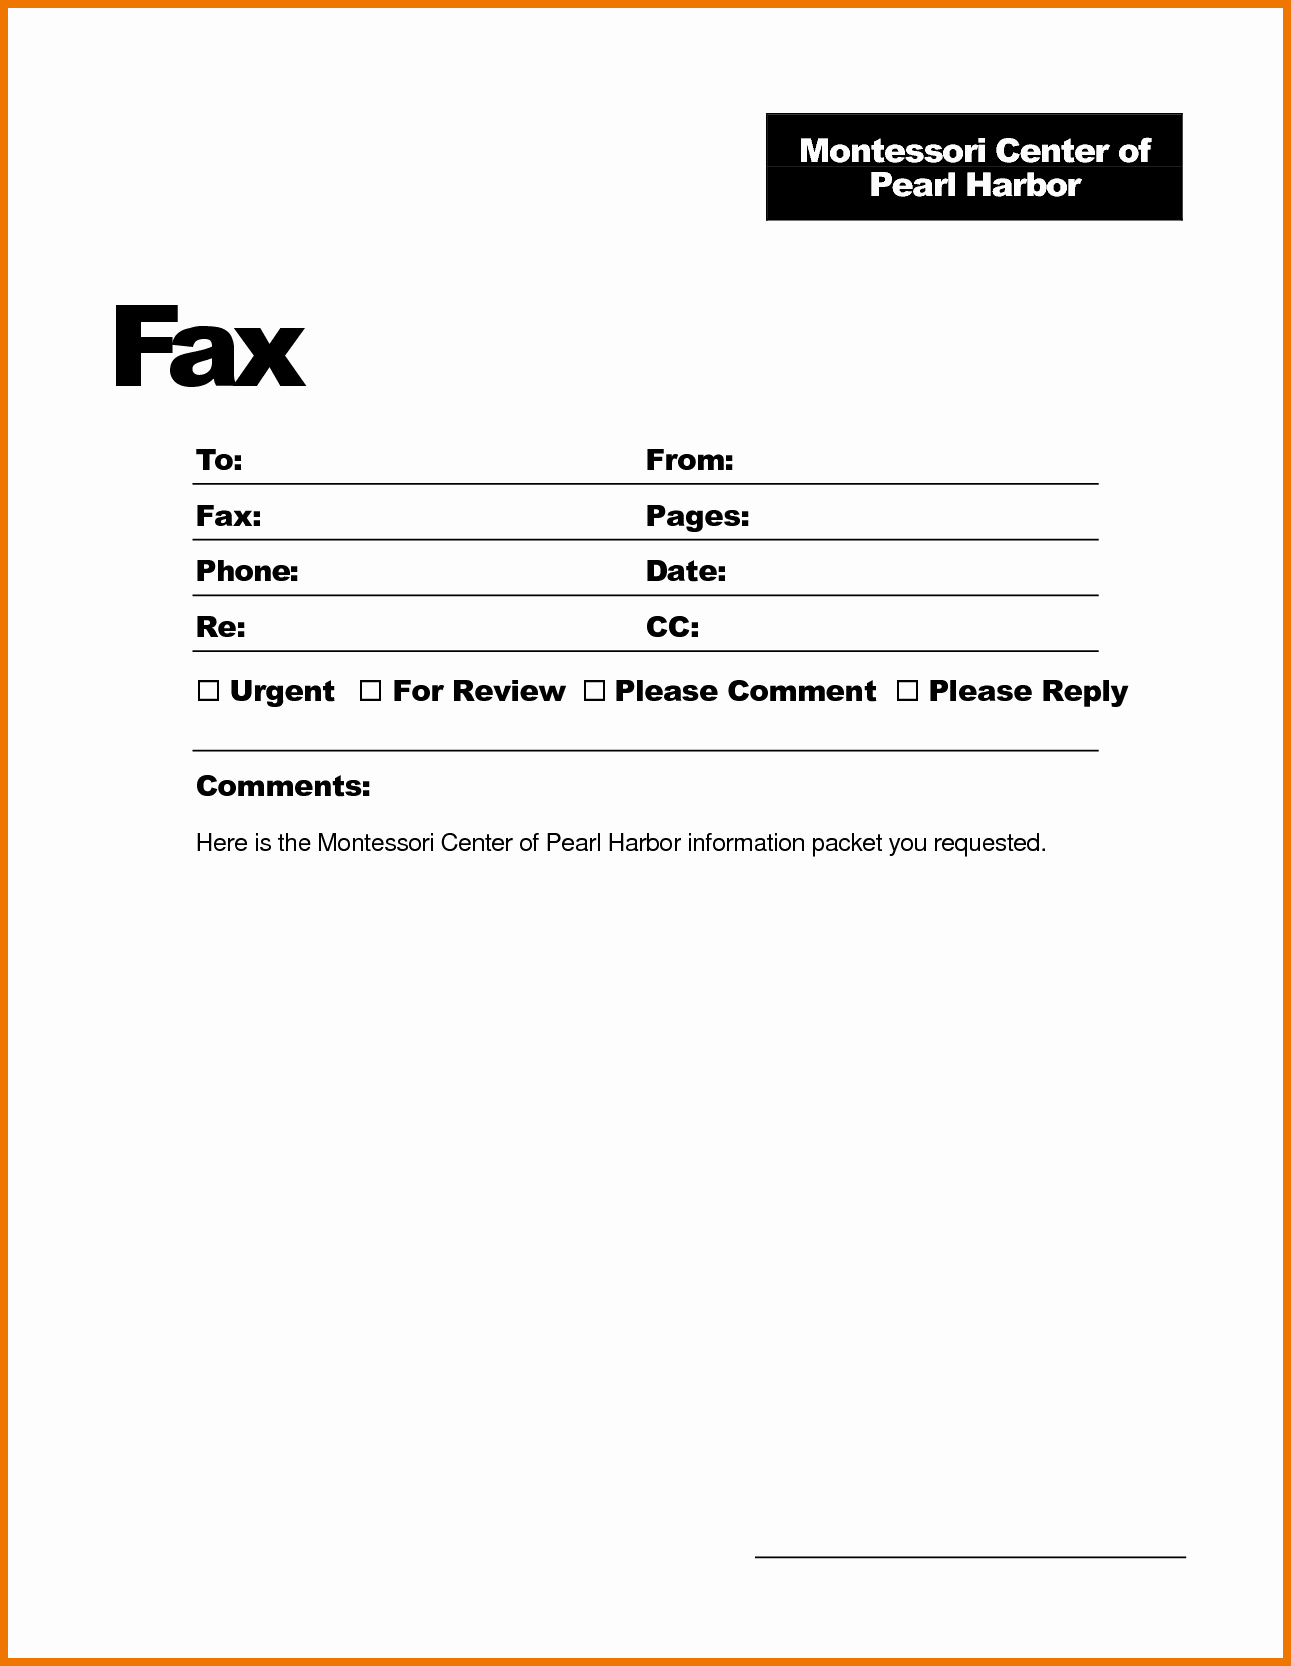 Fax Cover Sheet format Inspirational Fax Cover Letter Microsoft Word 2007